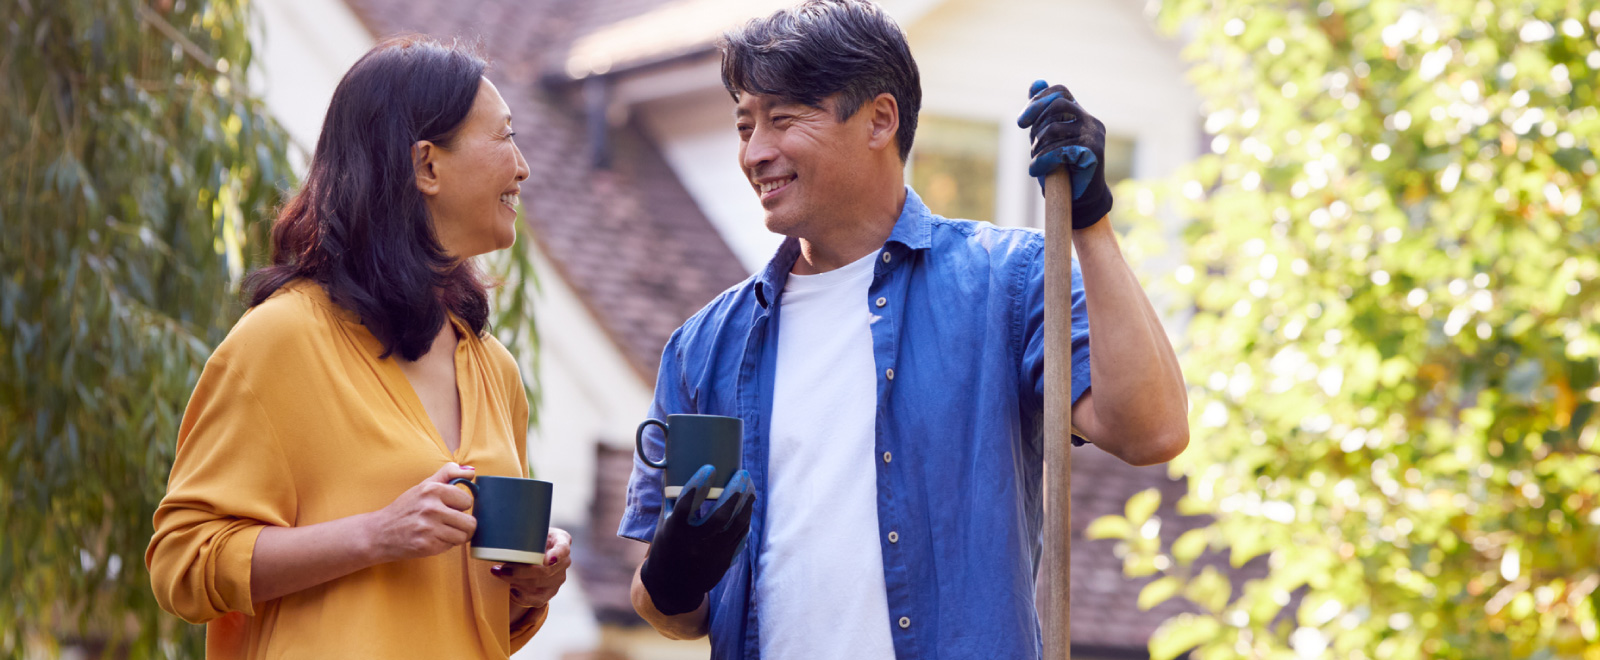 A couple smiling at one another, each holding a coffee mug and the man has on gloves and is holding up a shovel.